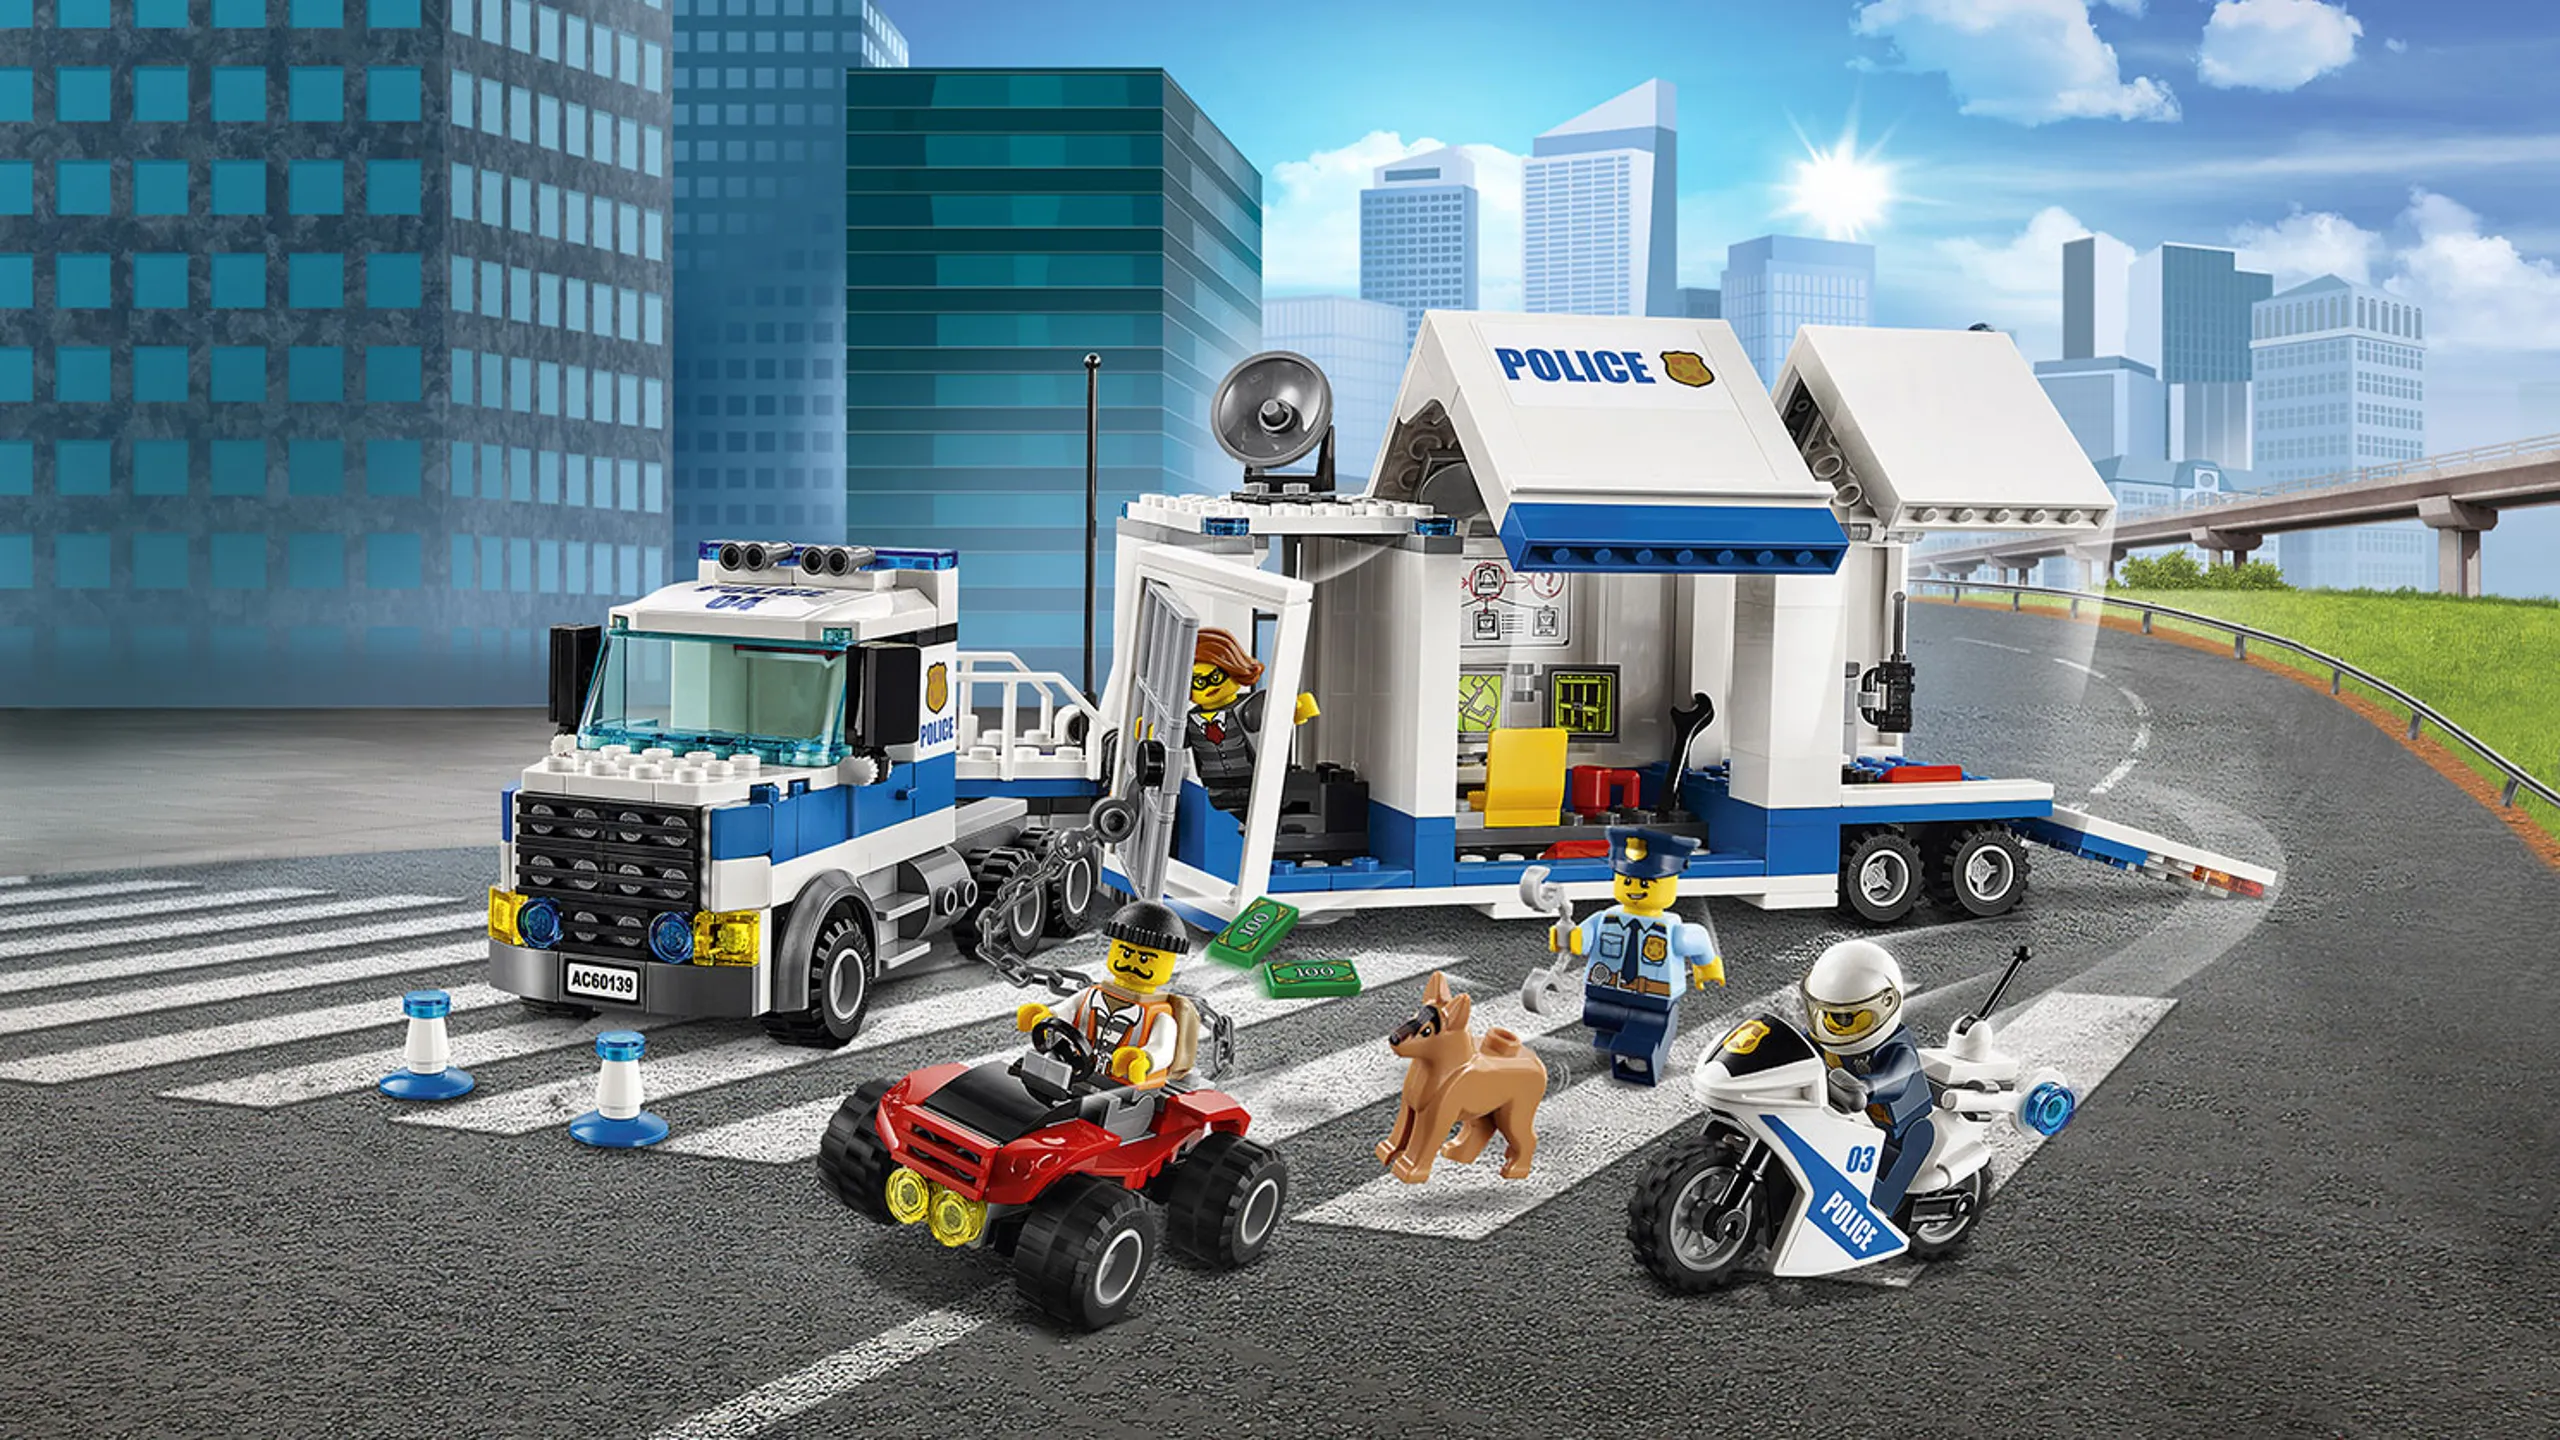 LEGO City Police - 60139 Mobile Command Center - The crook is escaping on an ATV from the police and their mobile command truck.